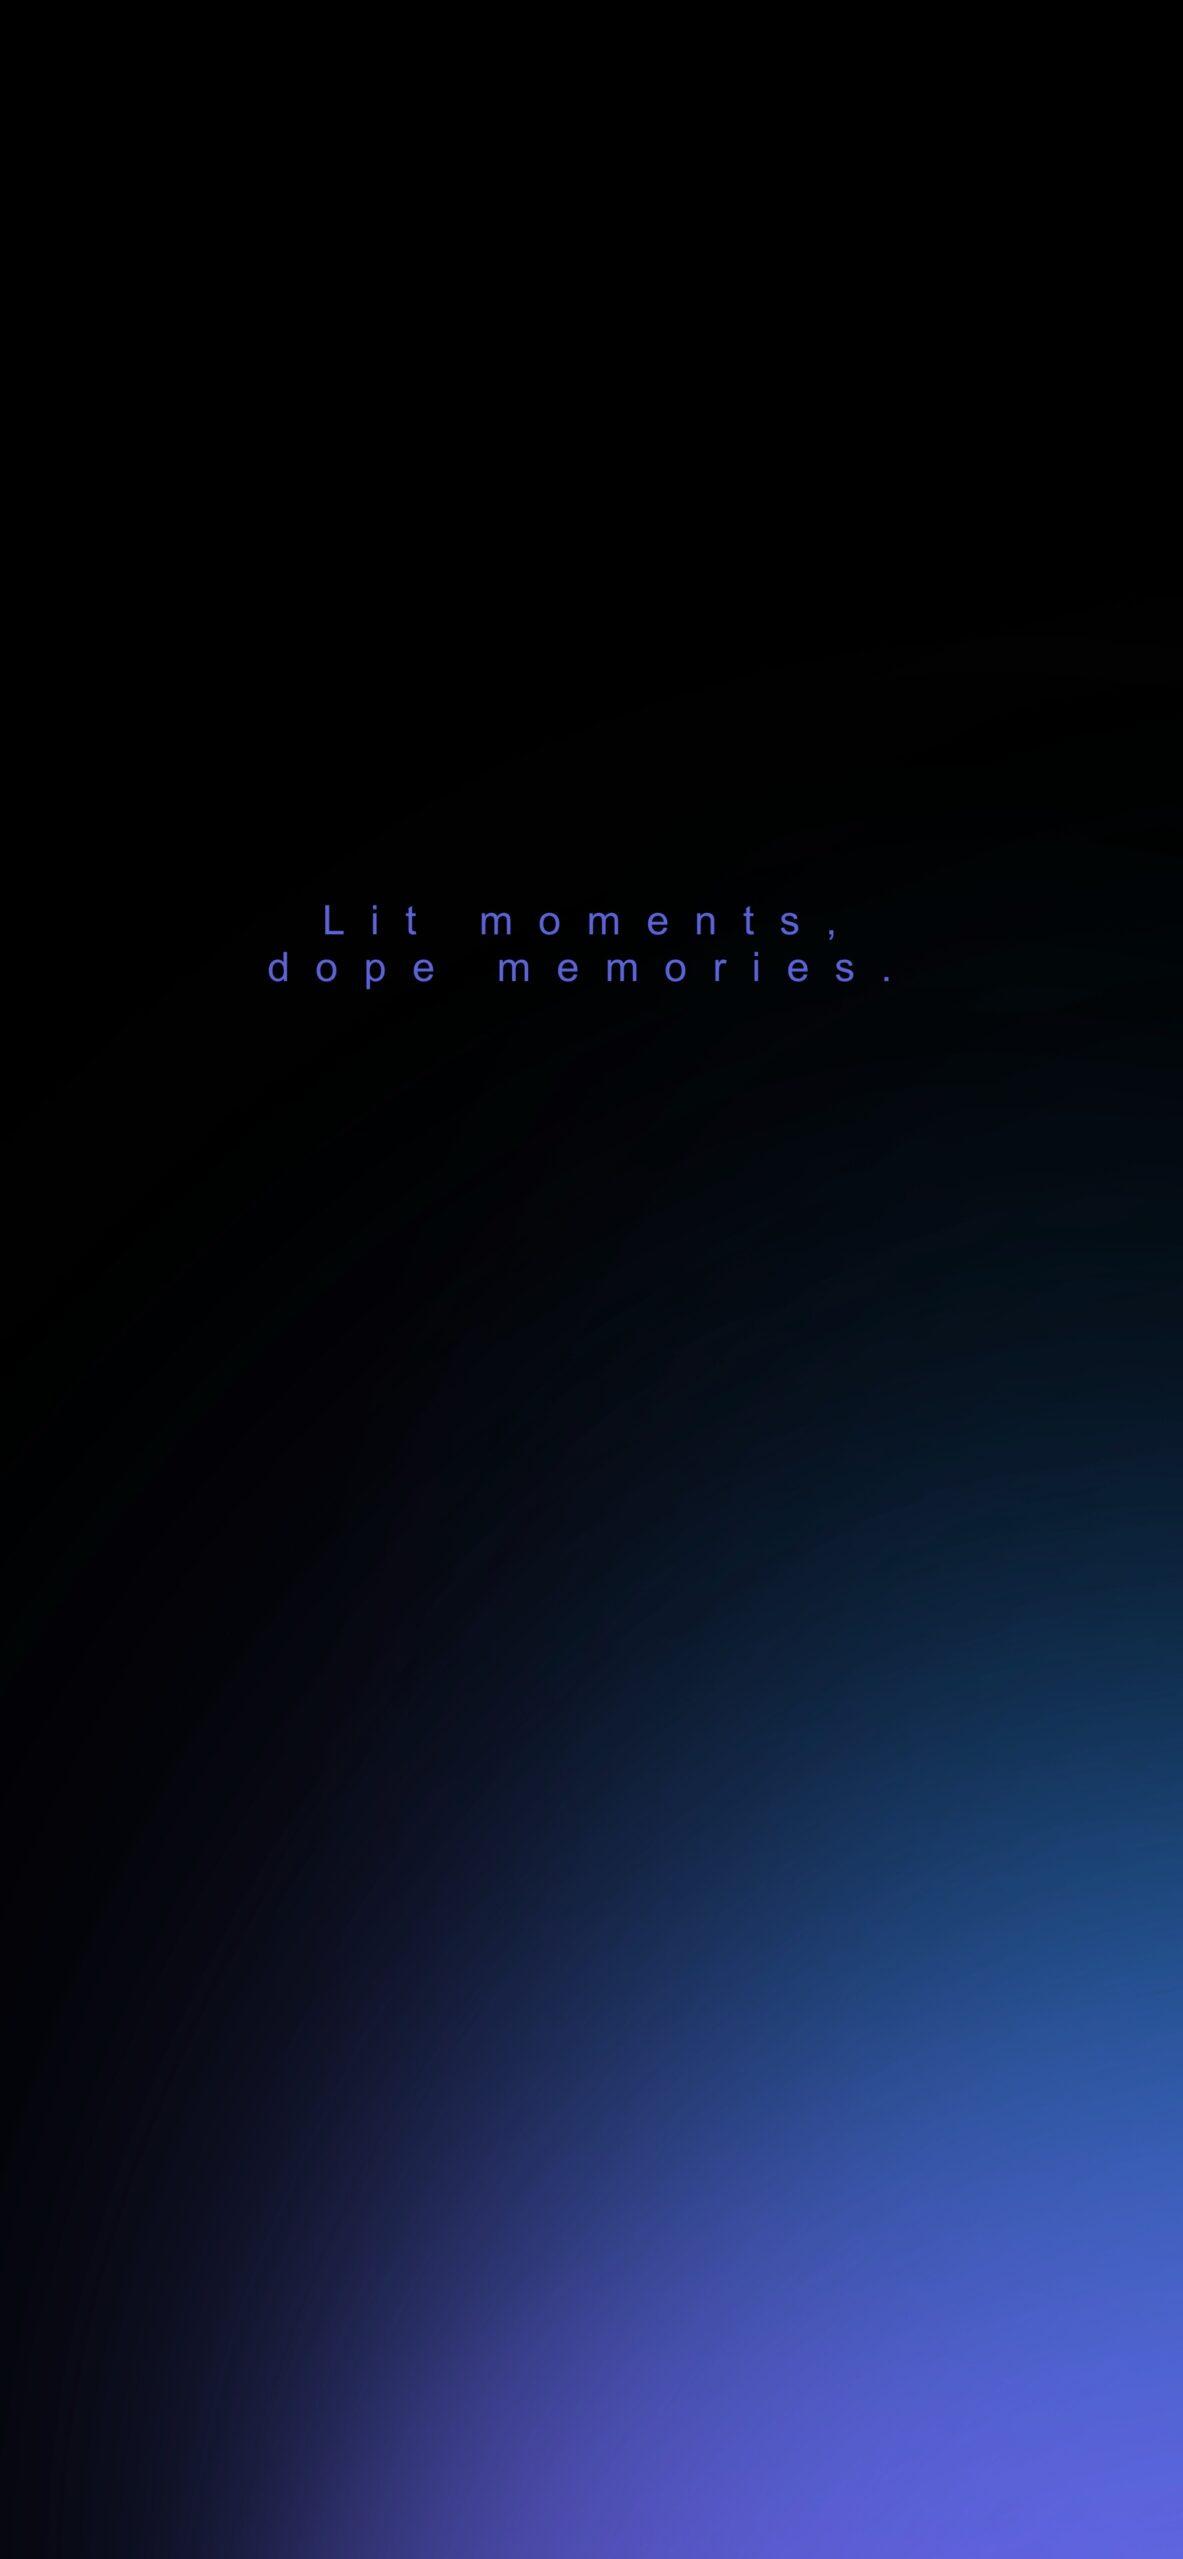 Lit Moments Dope Memories Blue Black Wallpaper For Ios